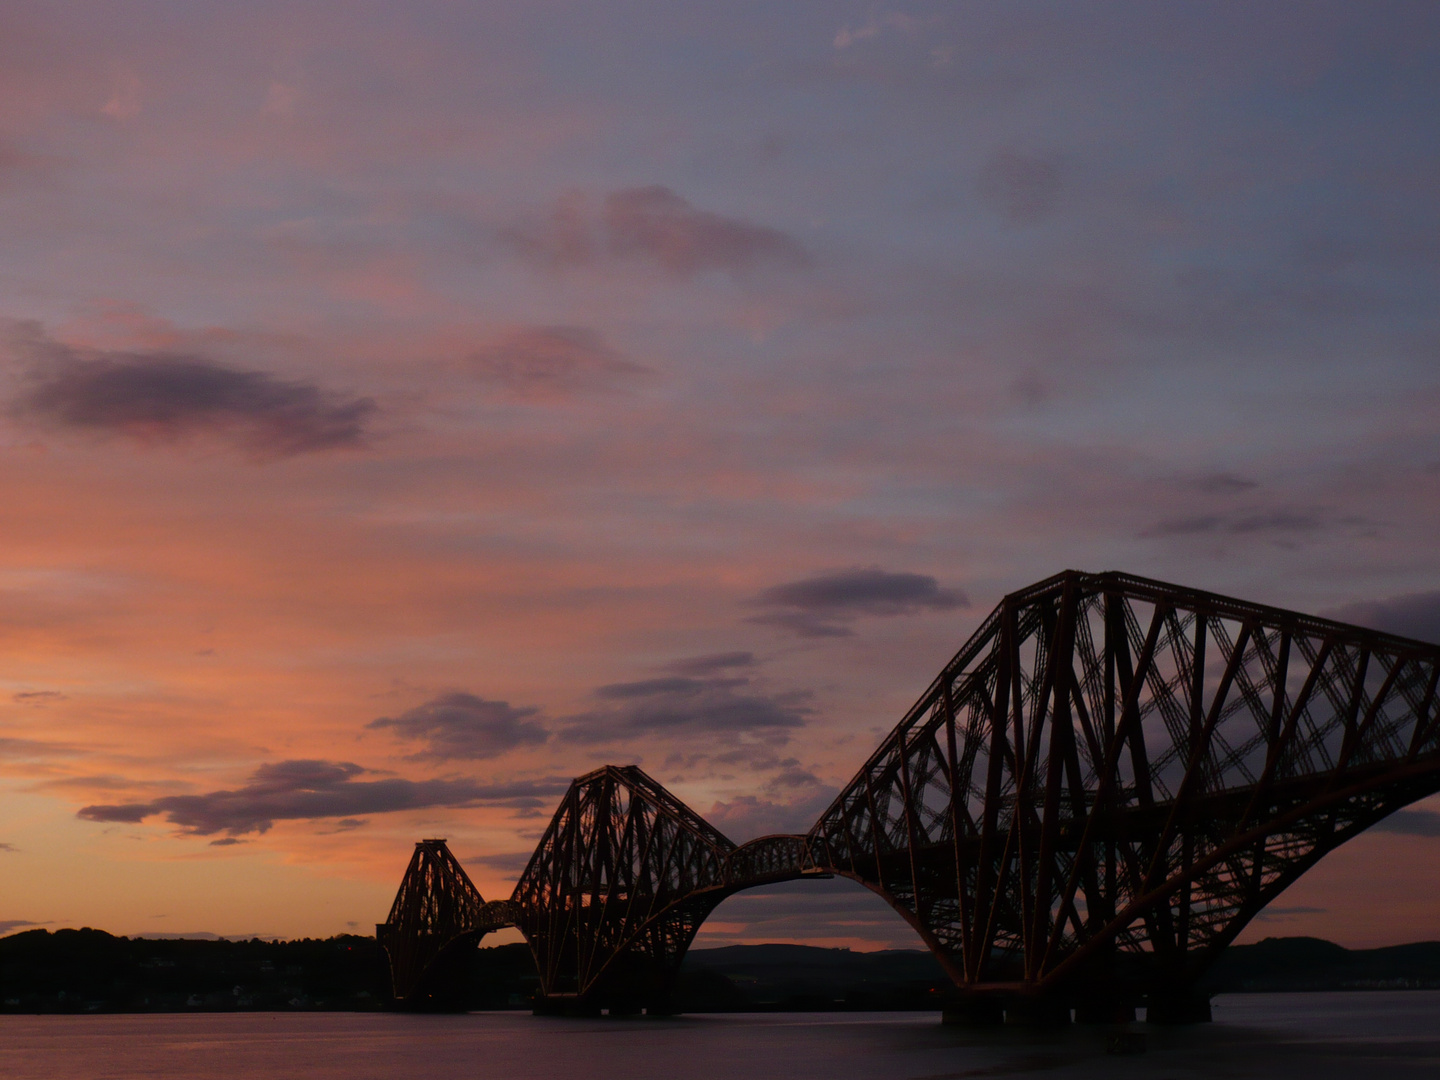 South Queensferry Forth Bridge